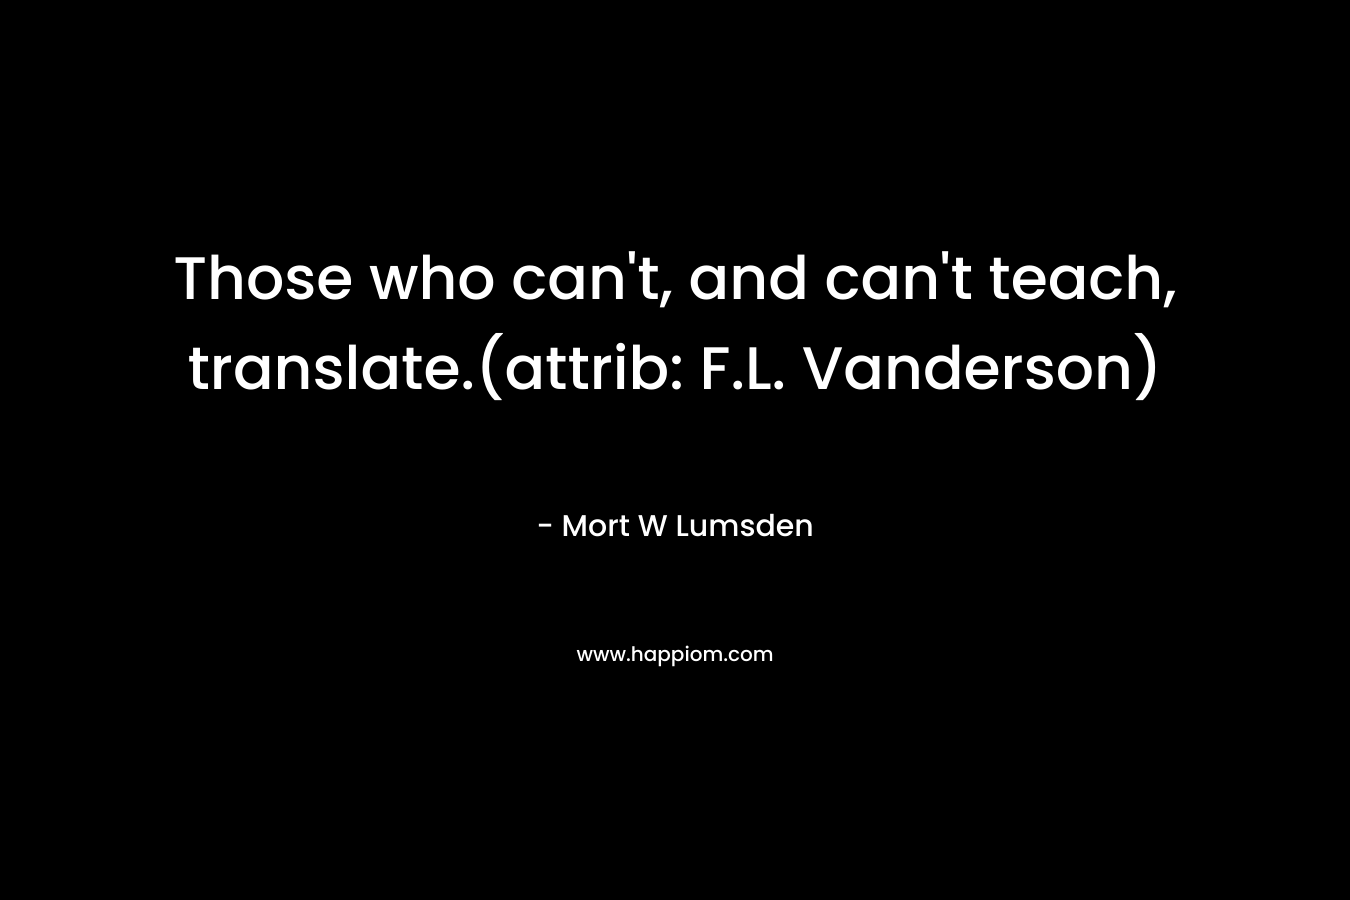 Those who can’t, and can’t teach, translate.(attrib: F.L. Vanderson) – Mort W Lumsden